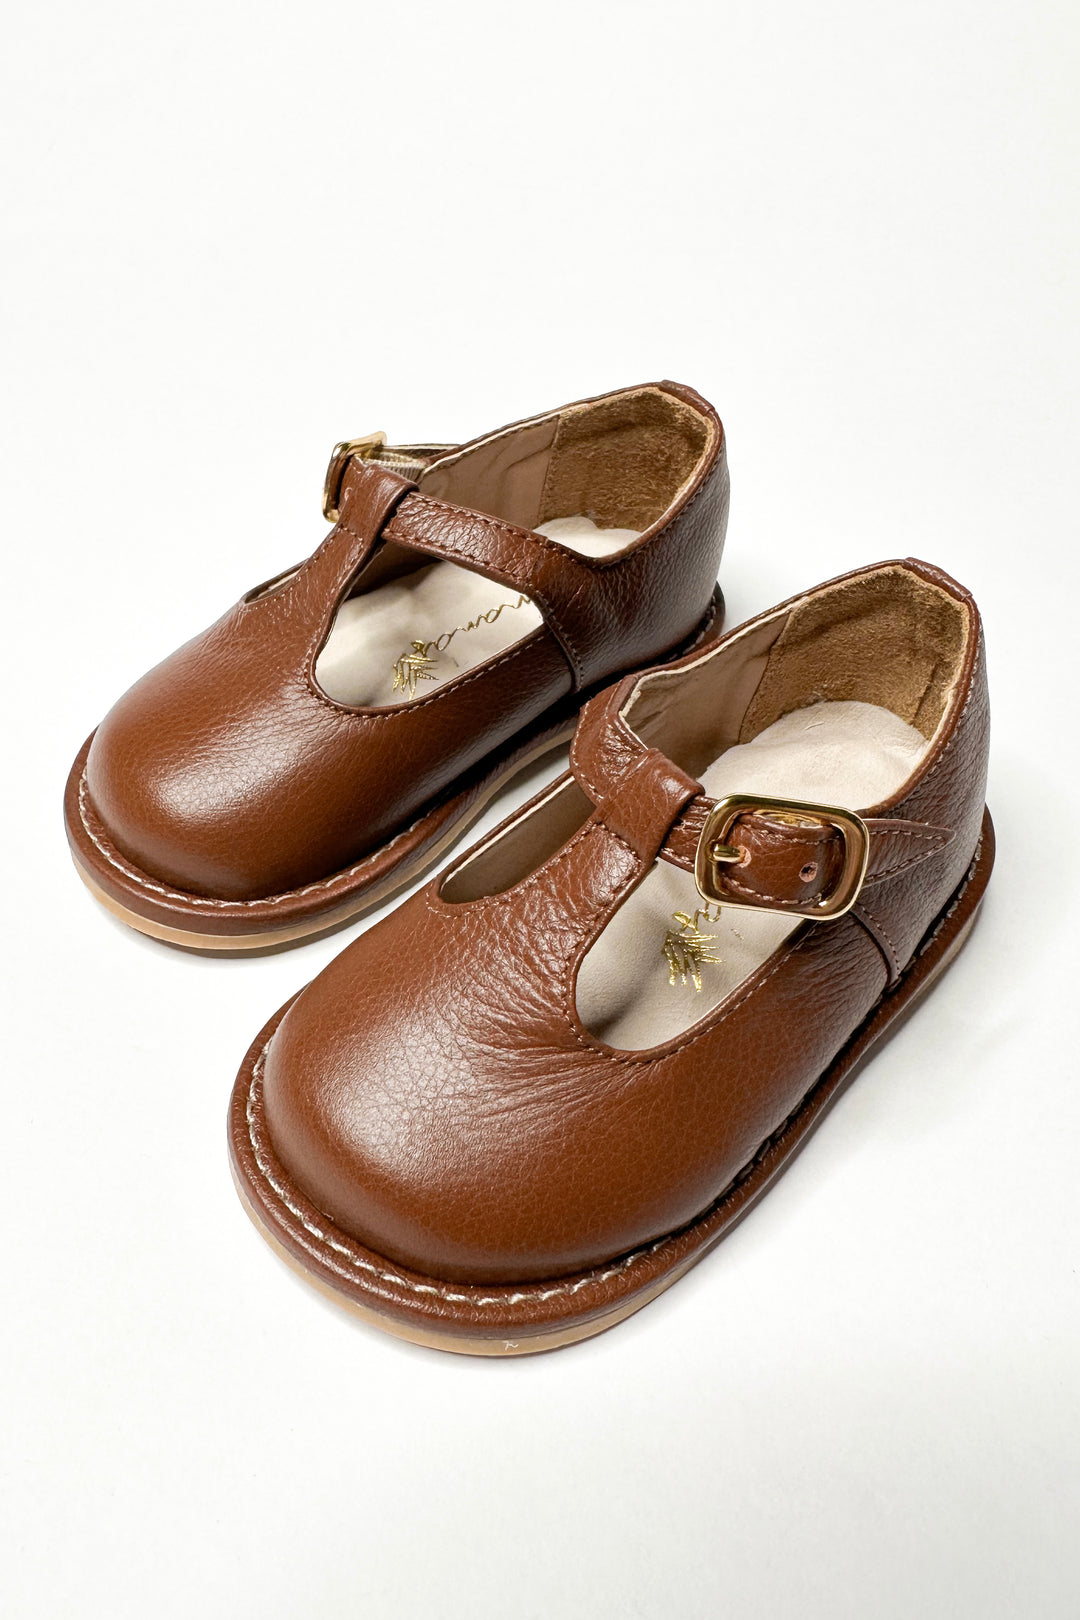 Ananás Petit "George" Brown Leather Shoes | Millie and John